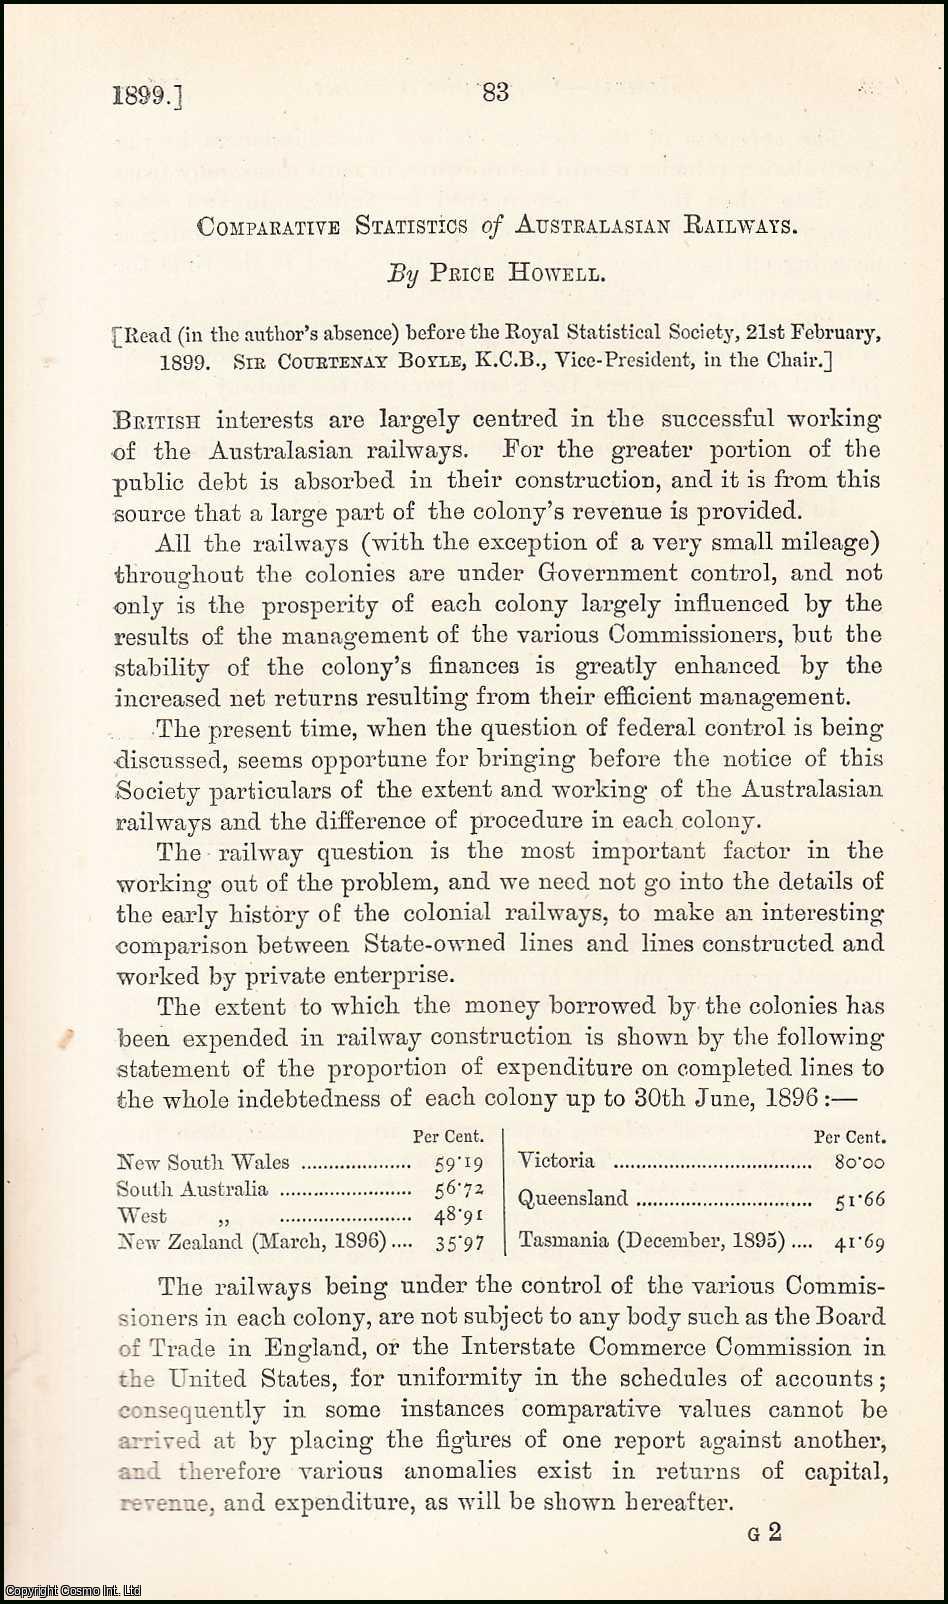 Price Howell - Comparative Statistics of Australasian Railways. An uncommon original article from the Journal of the Royal Statistical Society of London, 1899.